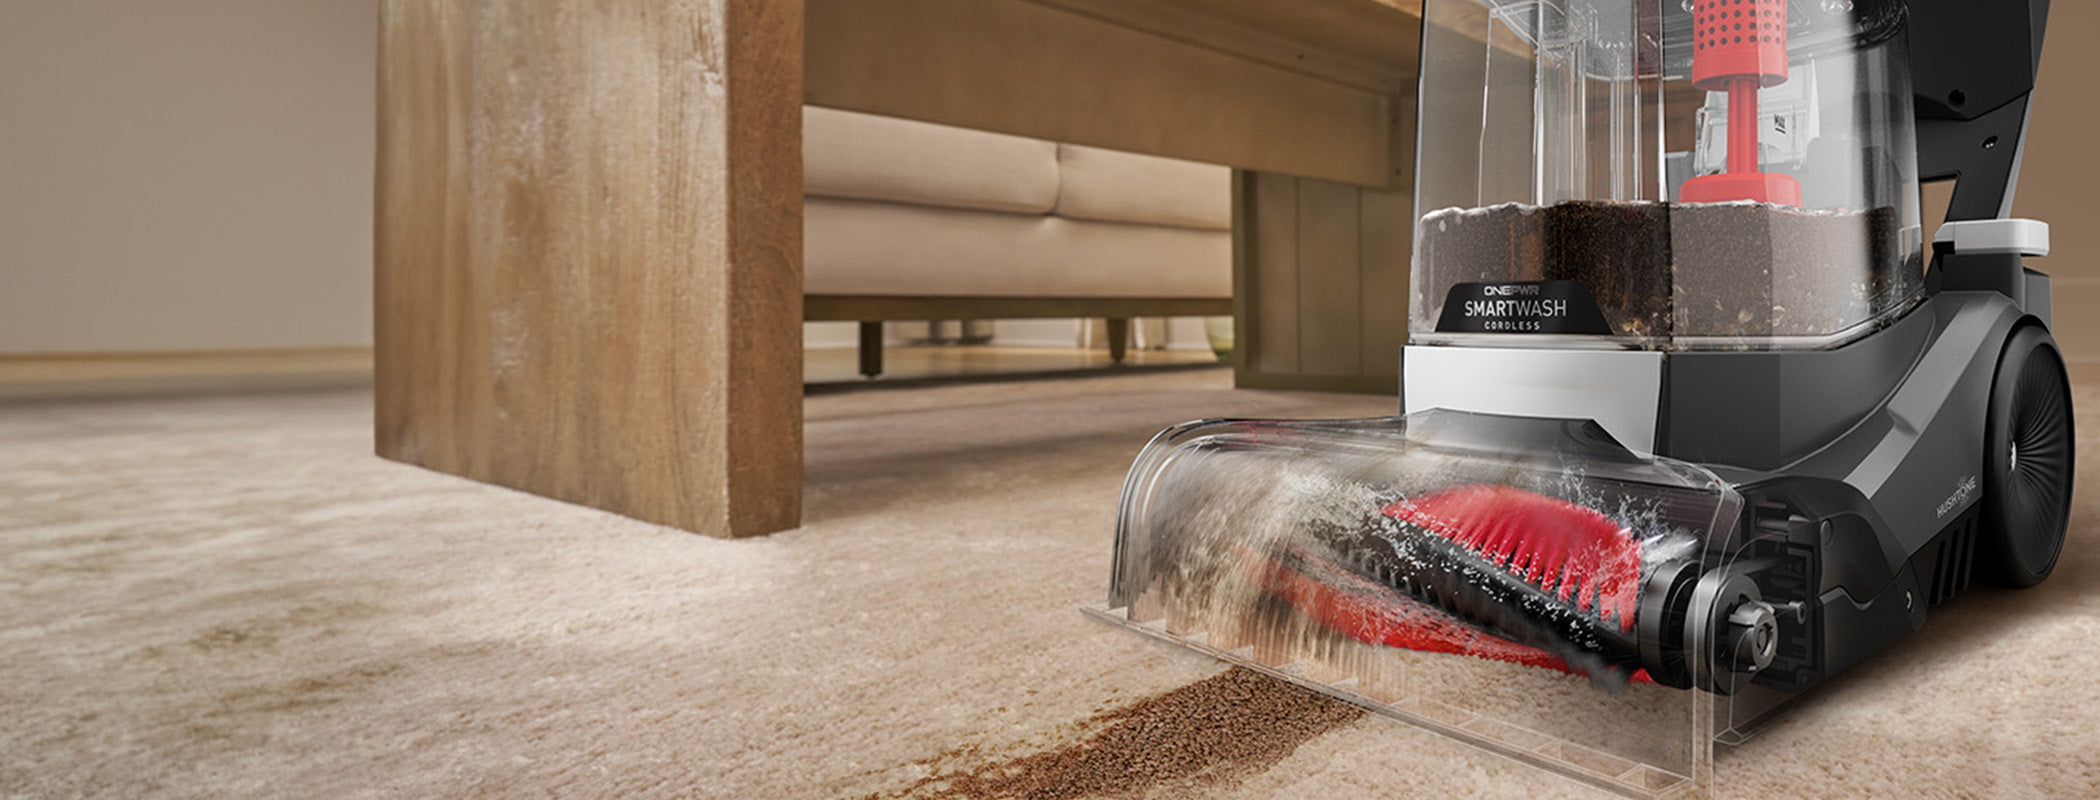 Cordless carpet cleaner washing a carpet that has dirt on it